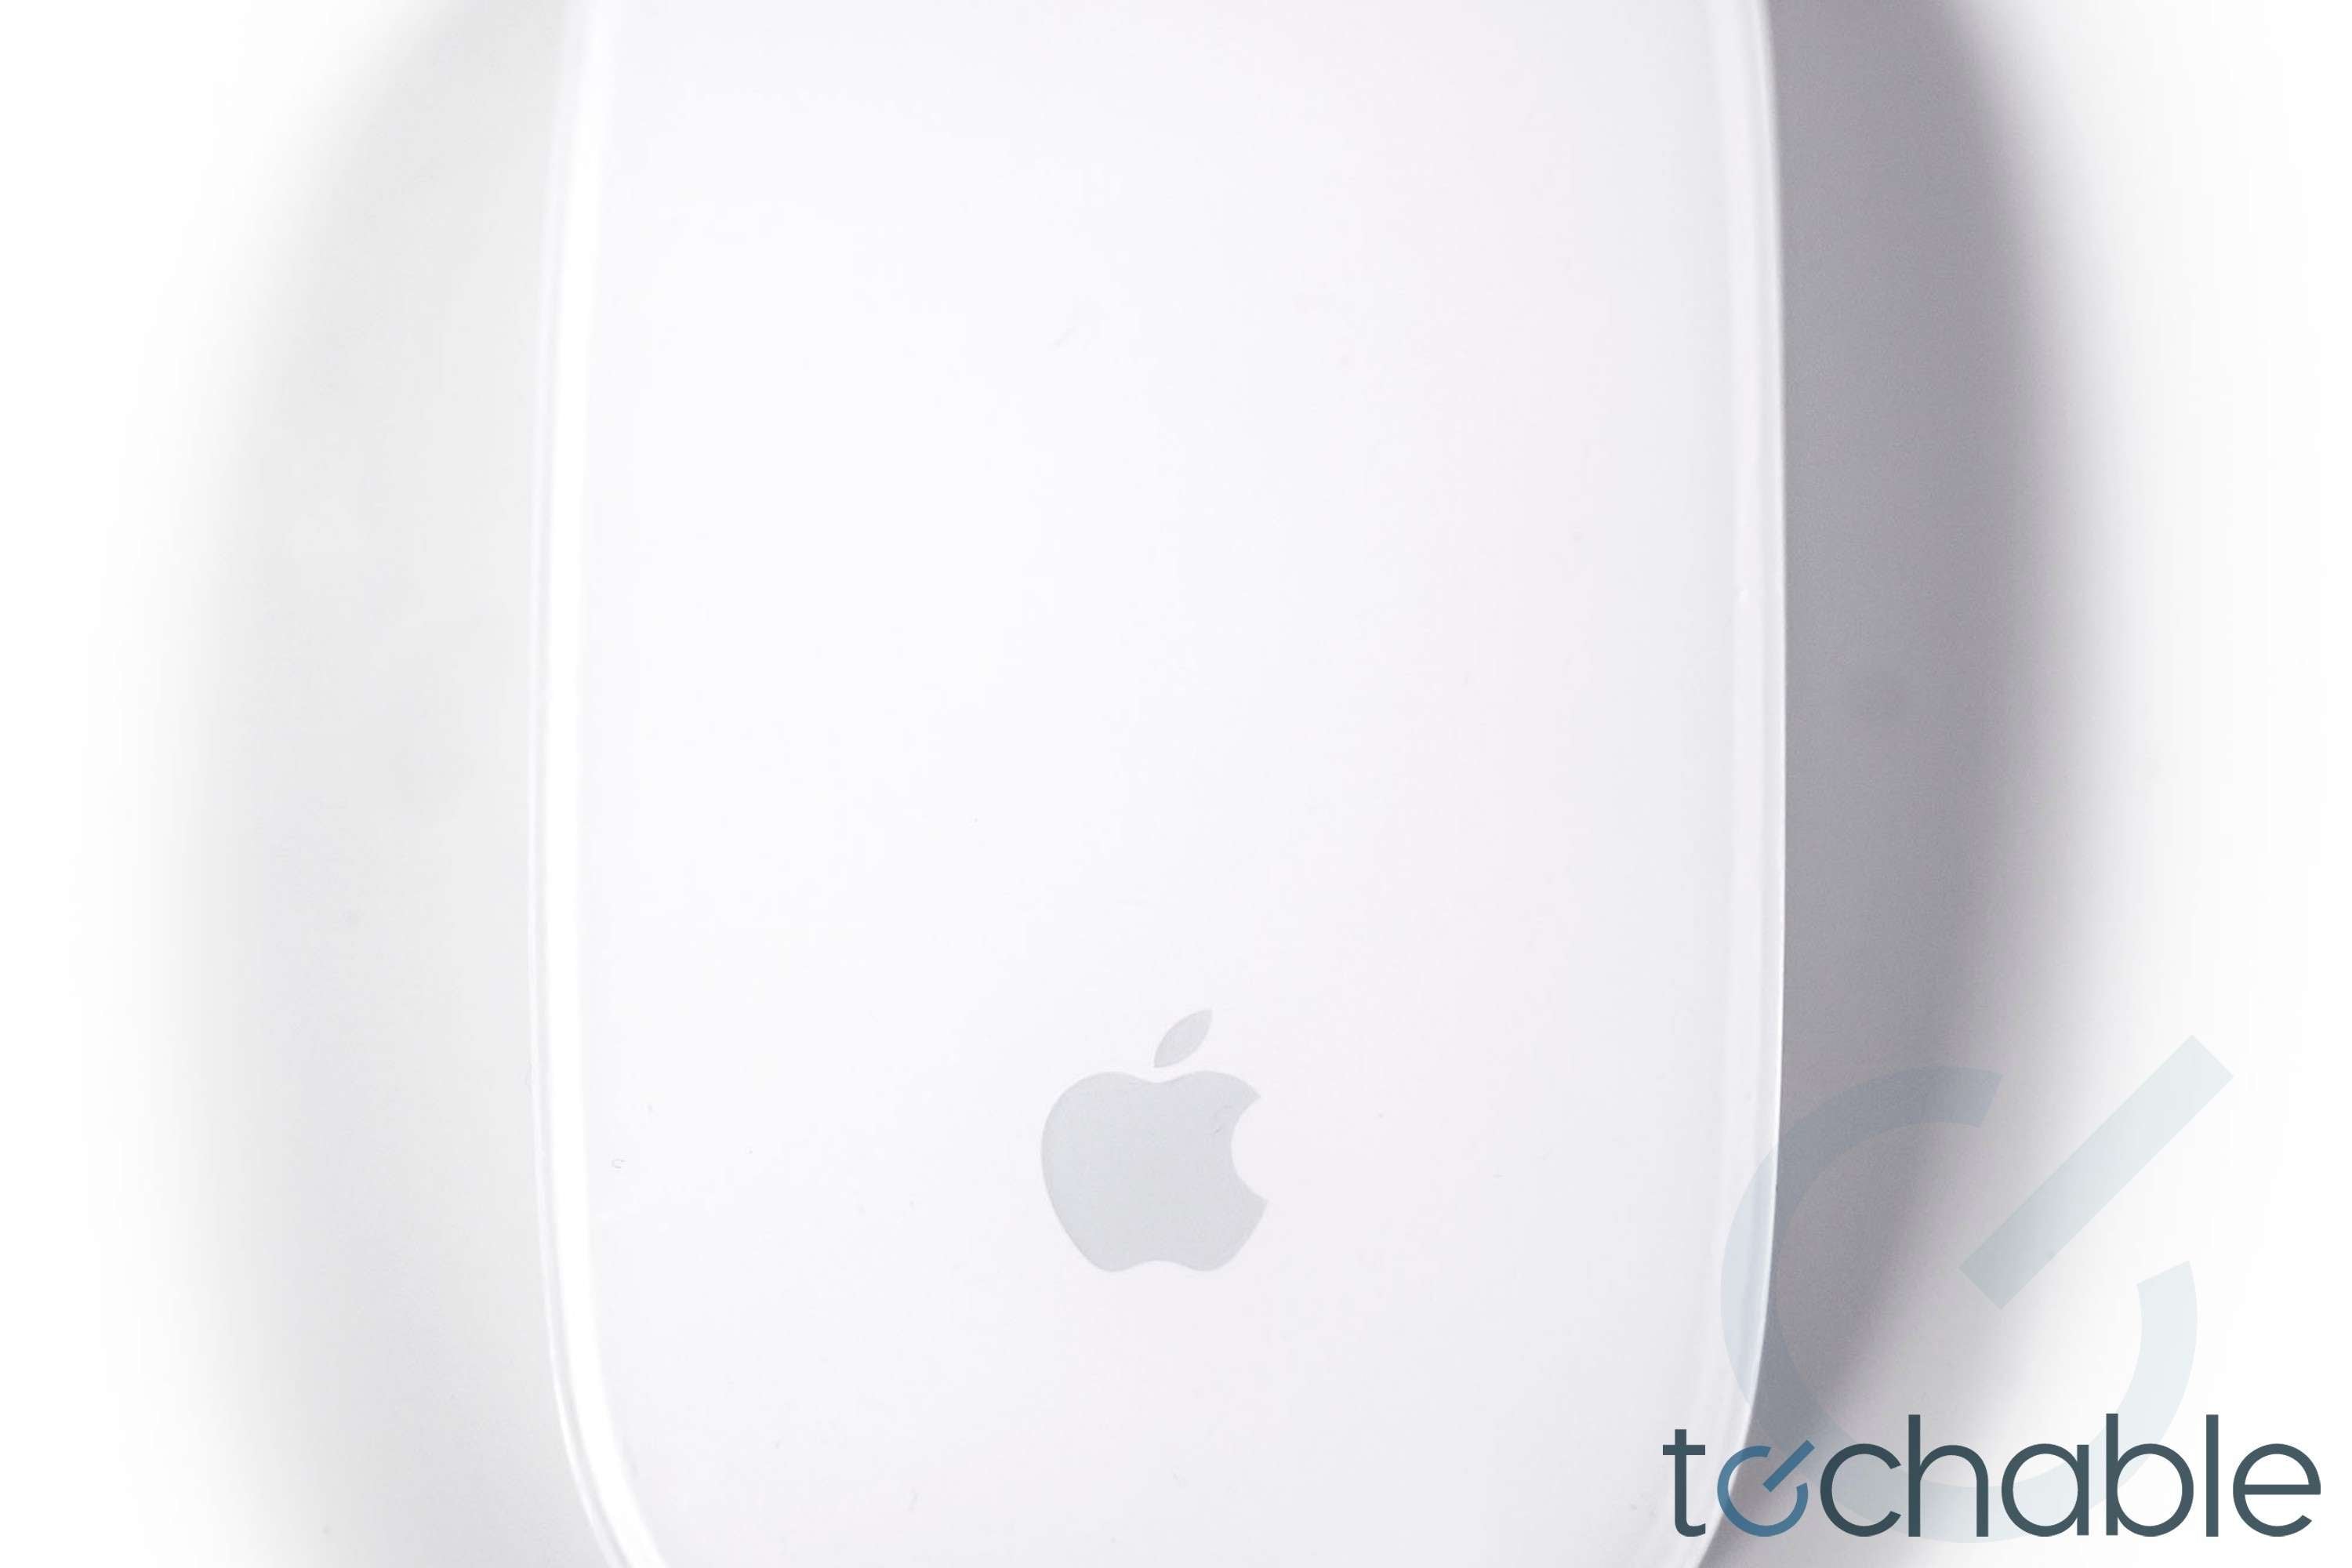 Buy Used & Refurbished Apple Magic Mouse Bluetooth Wireless A1296 